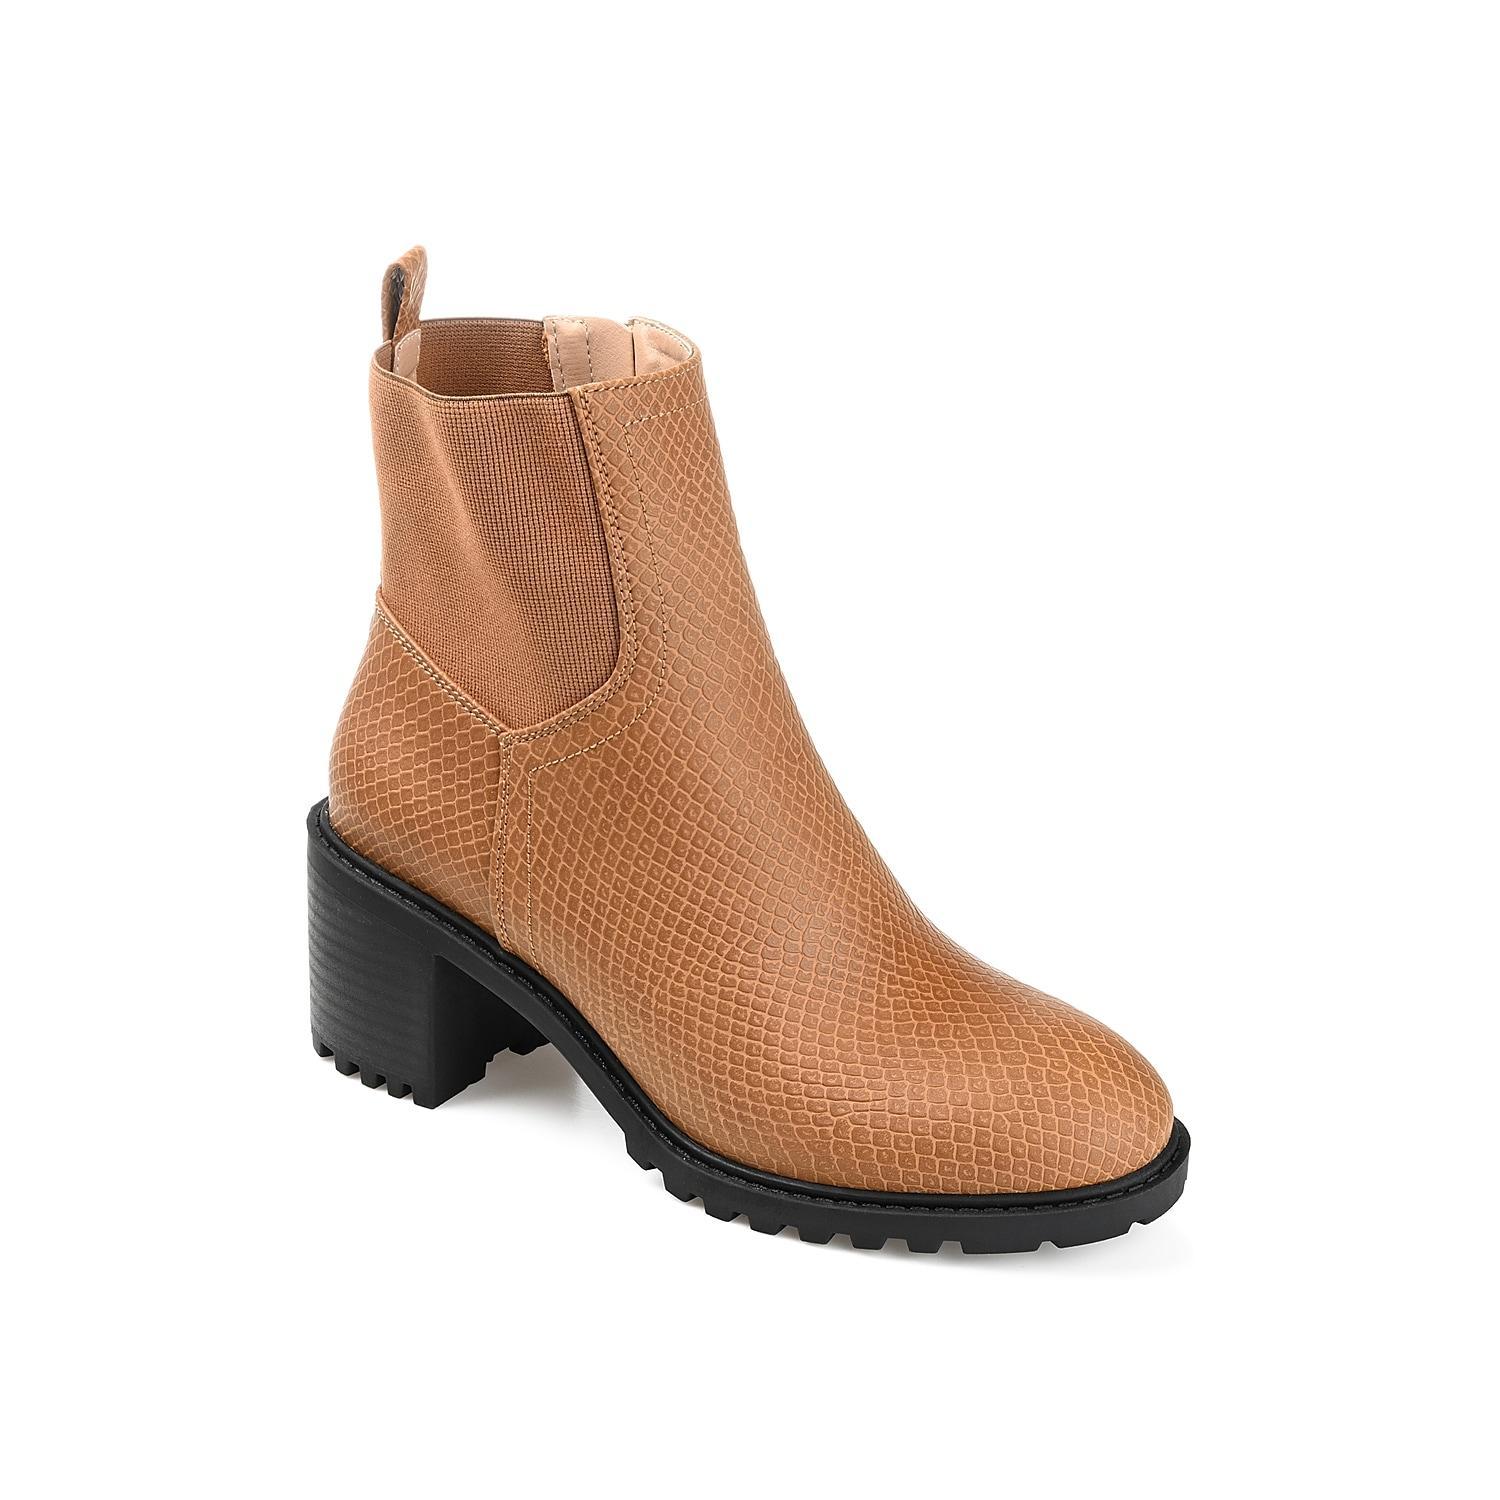 Journee Collection Womens Hallie Bootie Womens Shoes Product Image